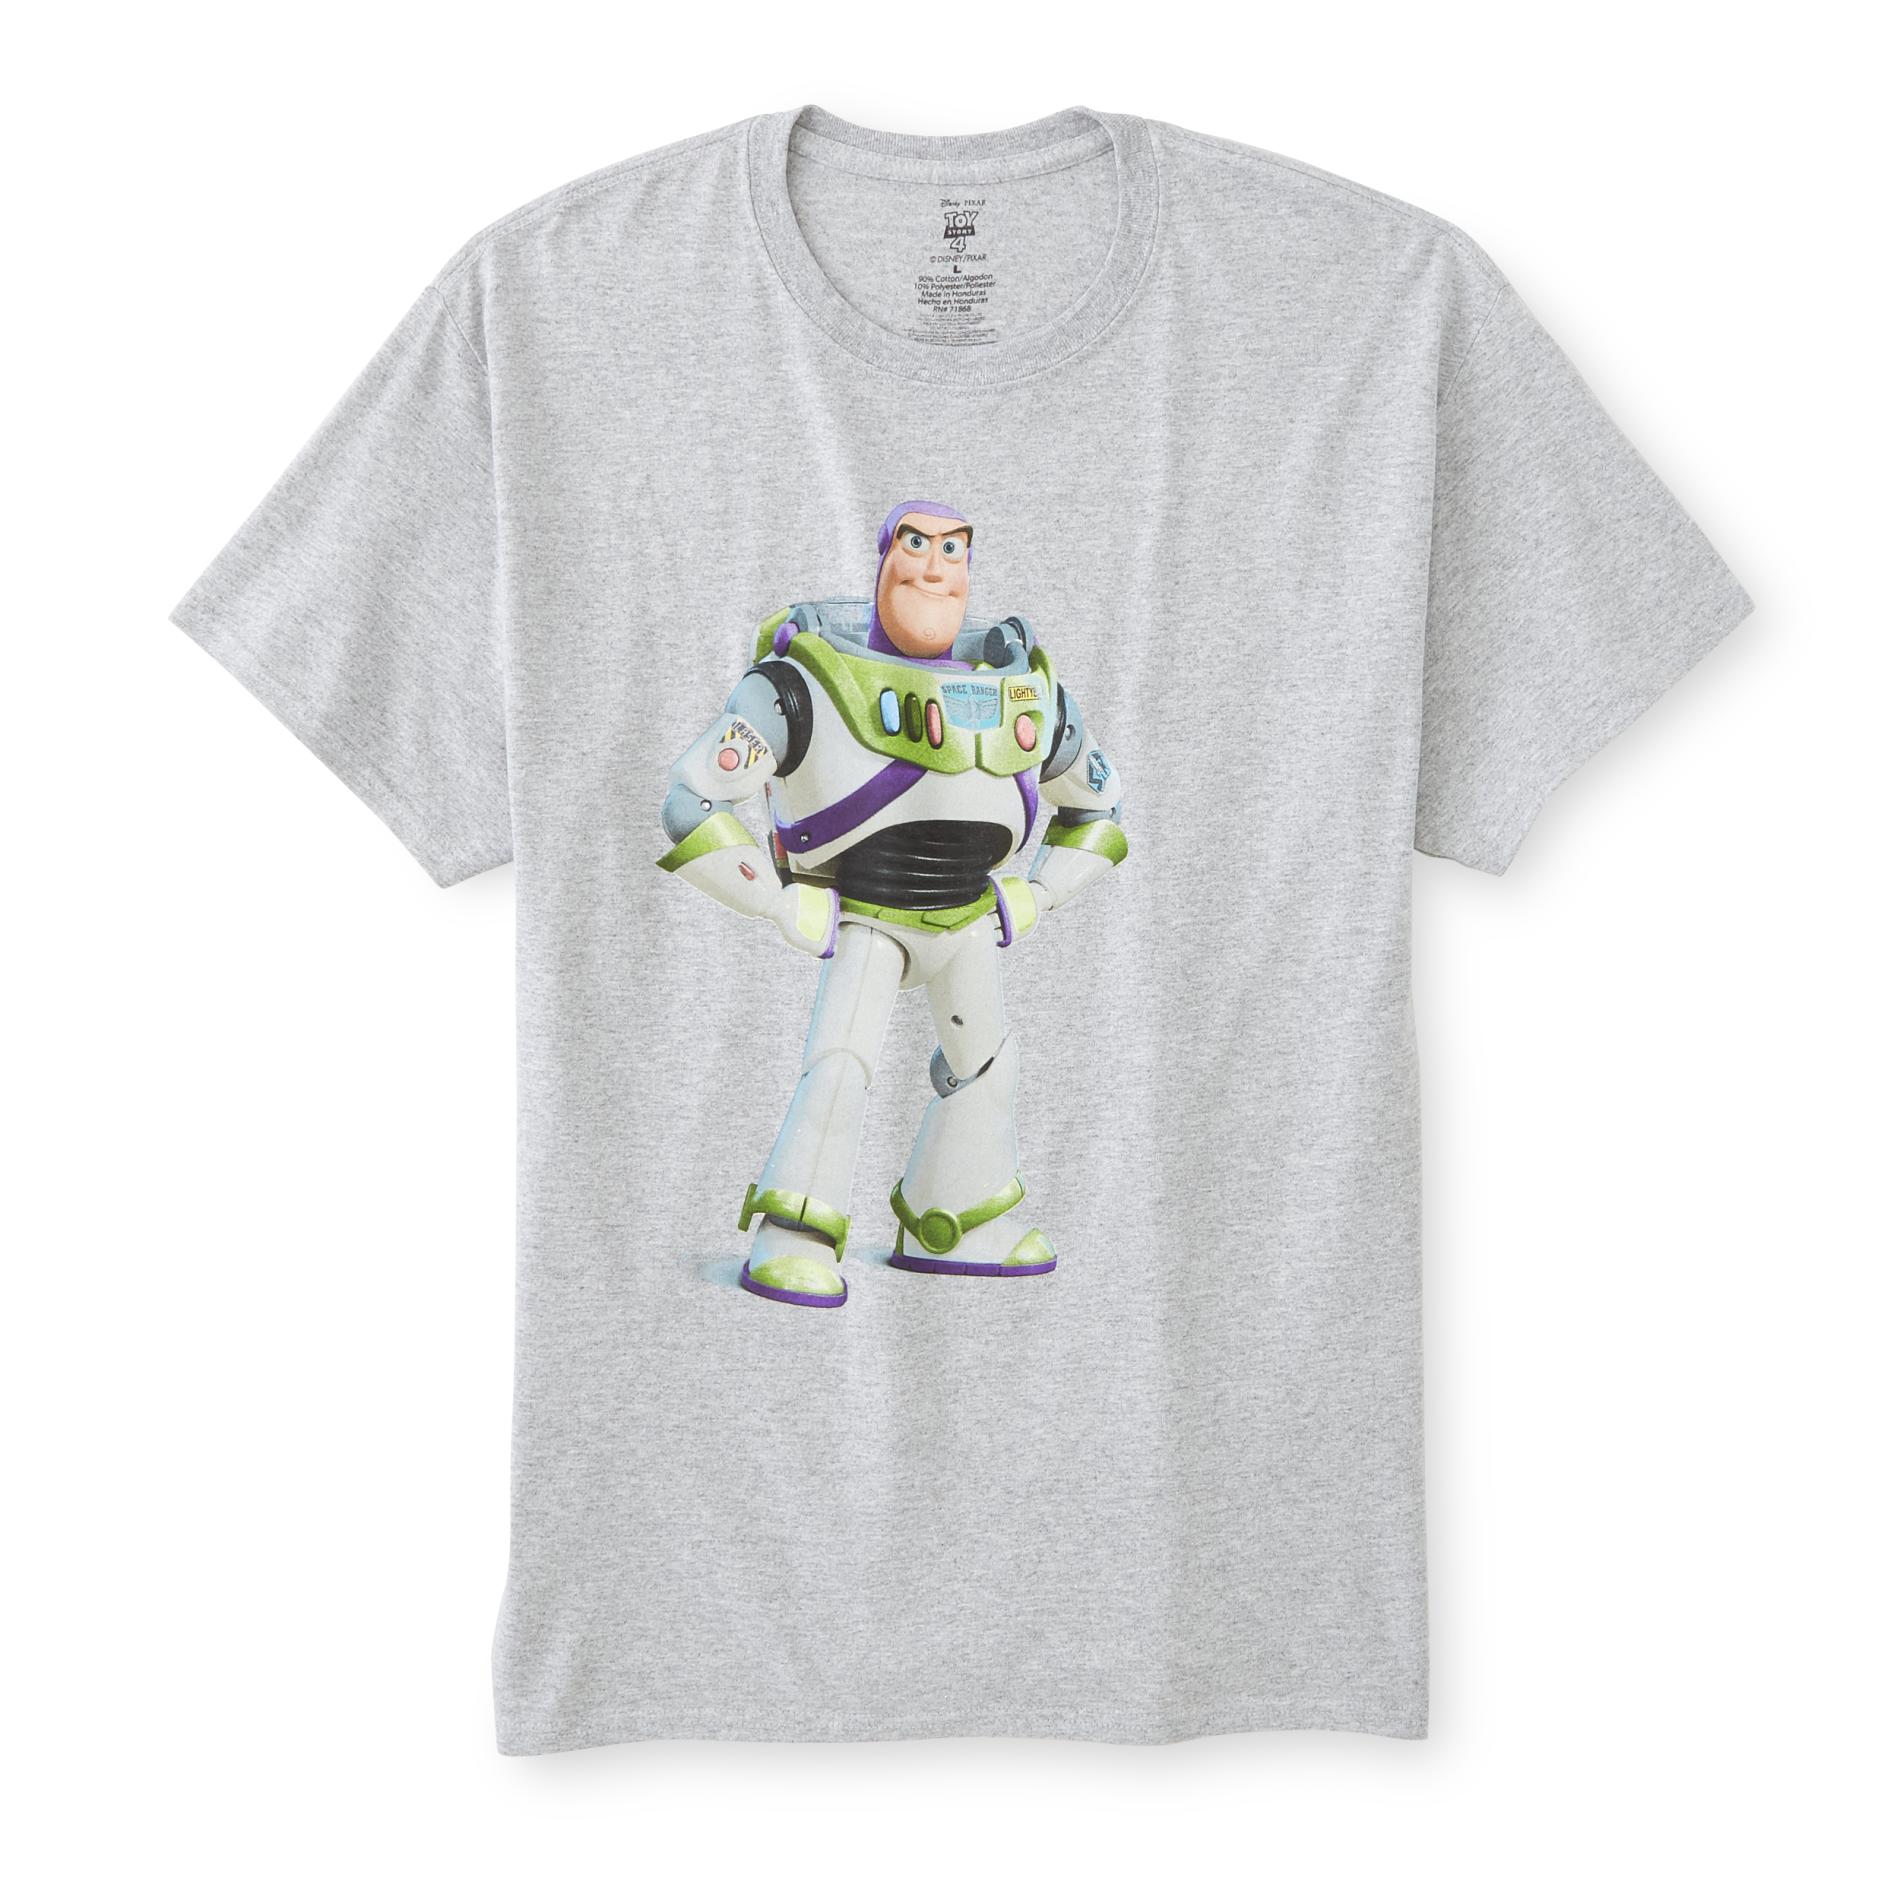 Toy Story Young Men's Graphic T-Shirt - Buzz Lightyear